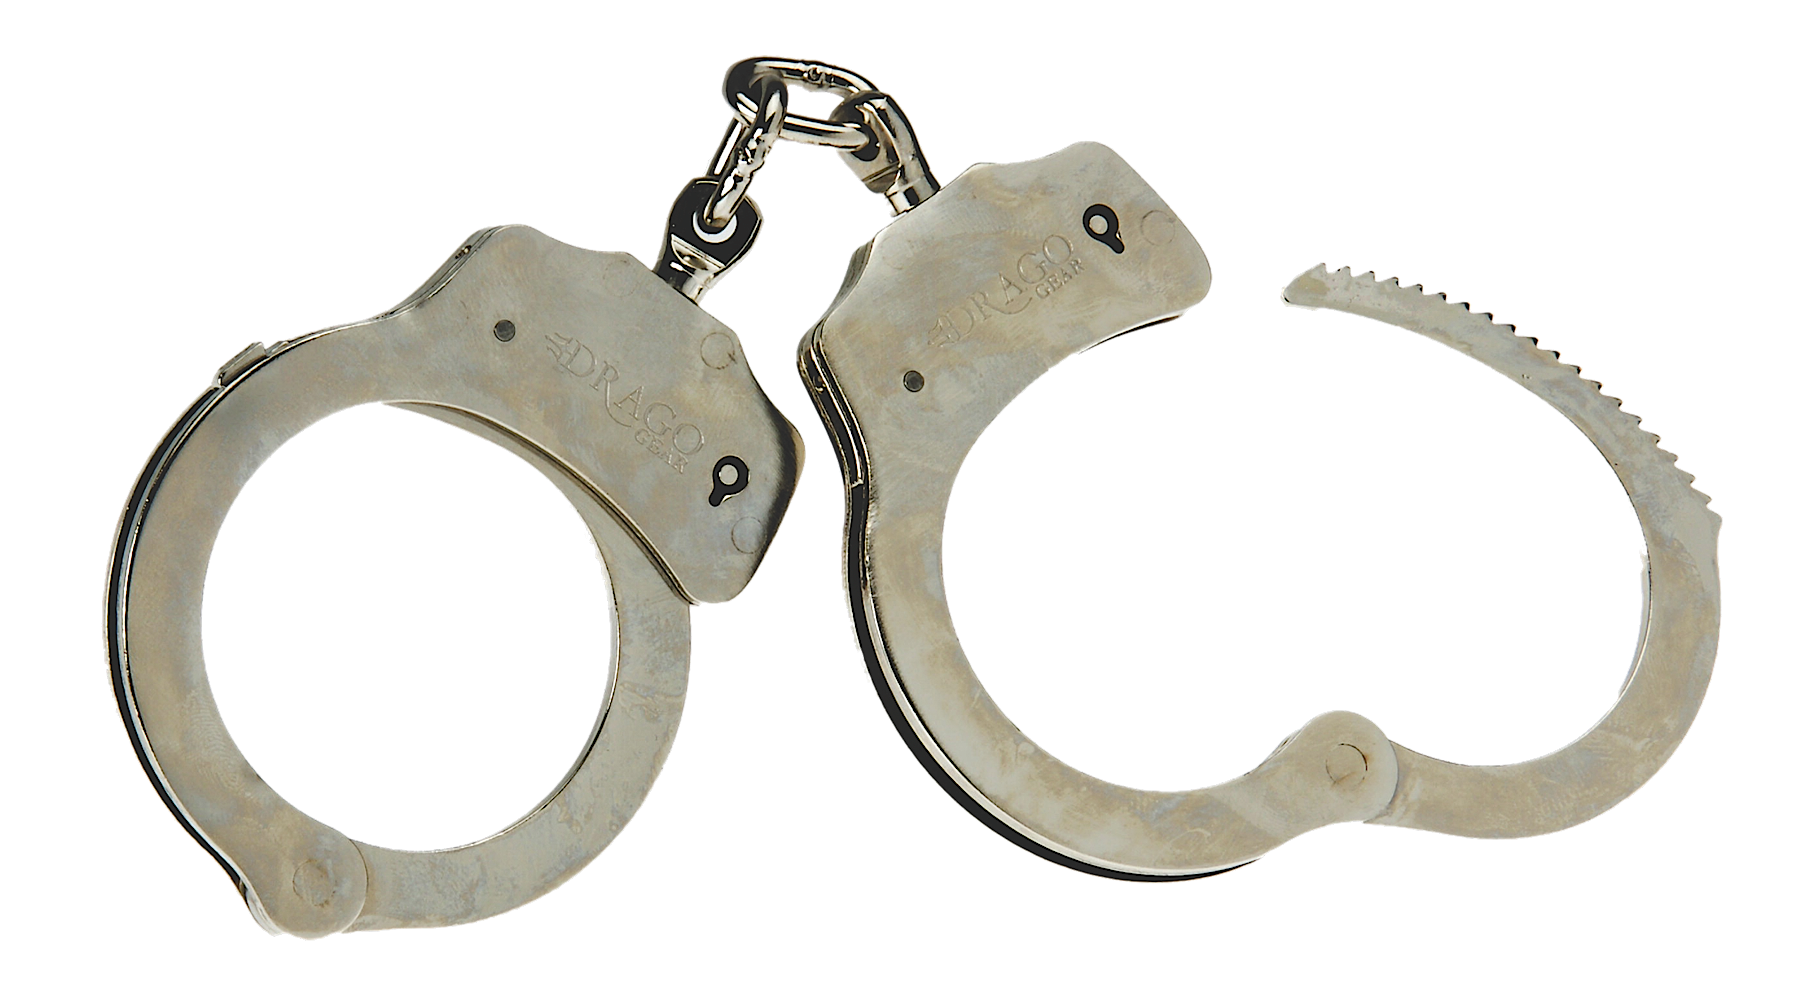 Png images free download. Handcuffs clipart gun